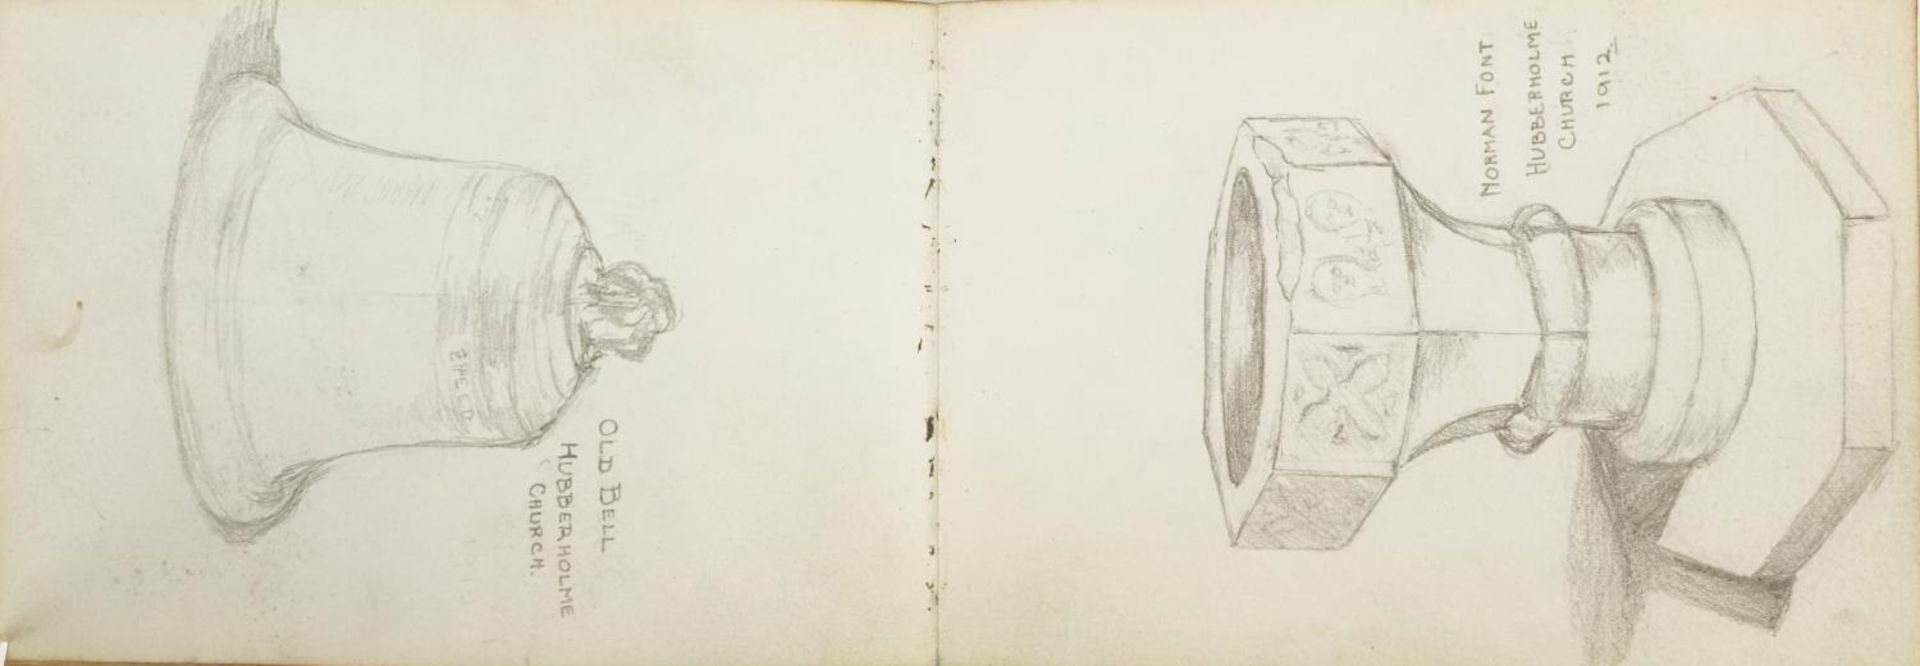 Early 20th century artist's travel sketchbook housing various watercolours and pencil sketches - Image 12 of 15